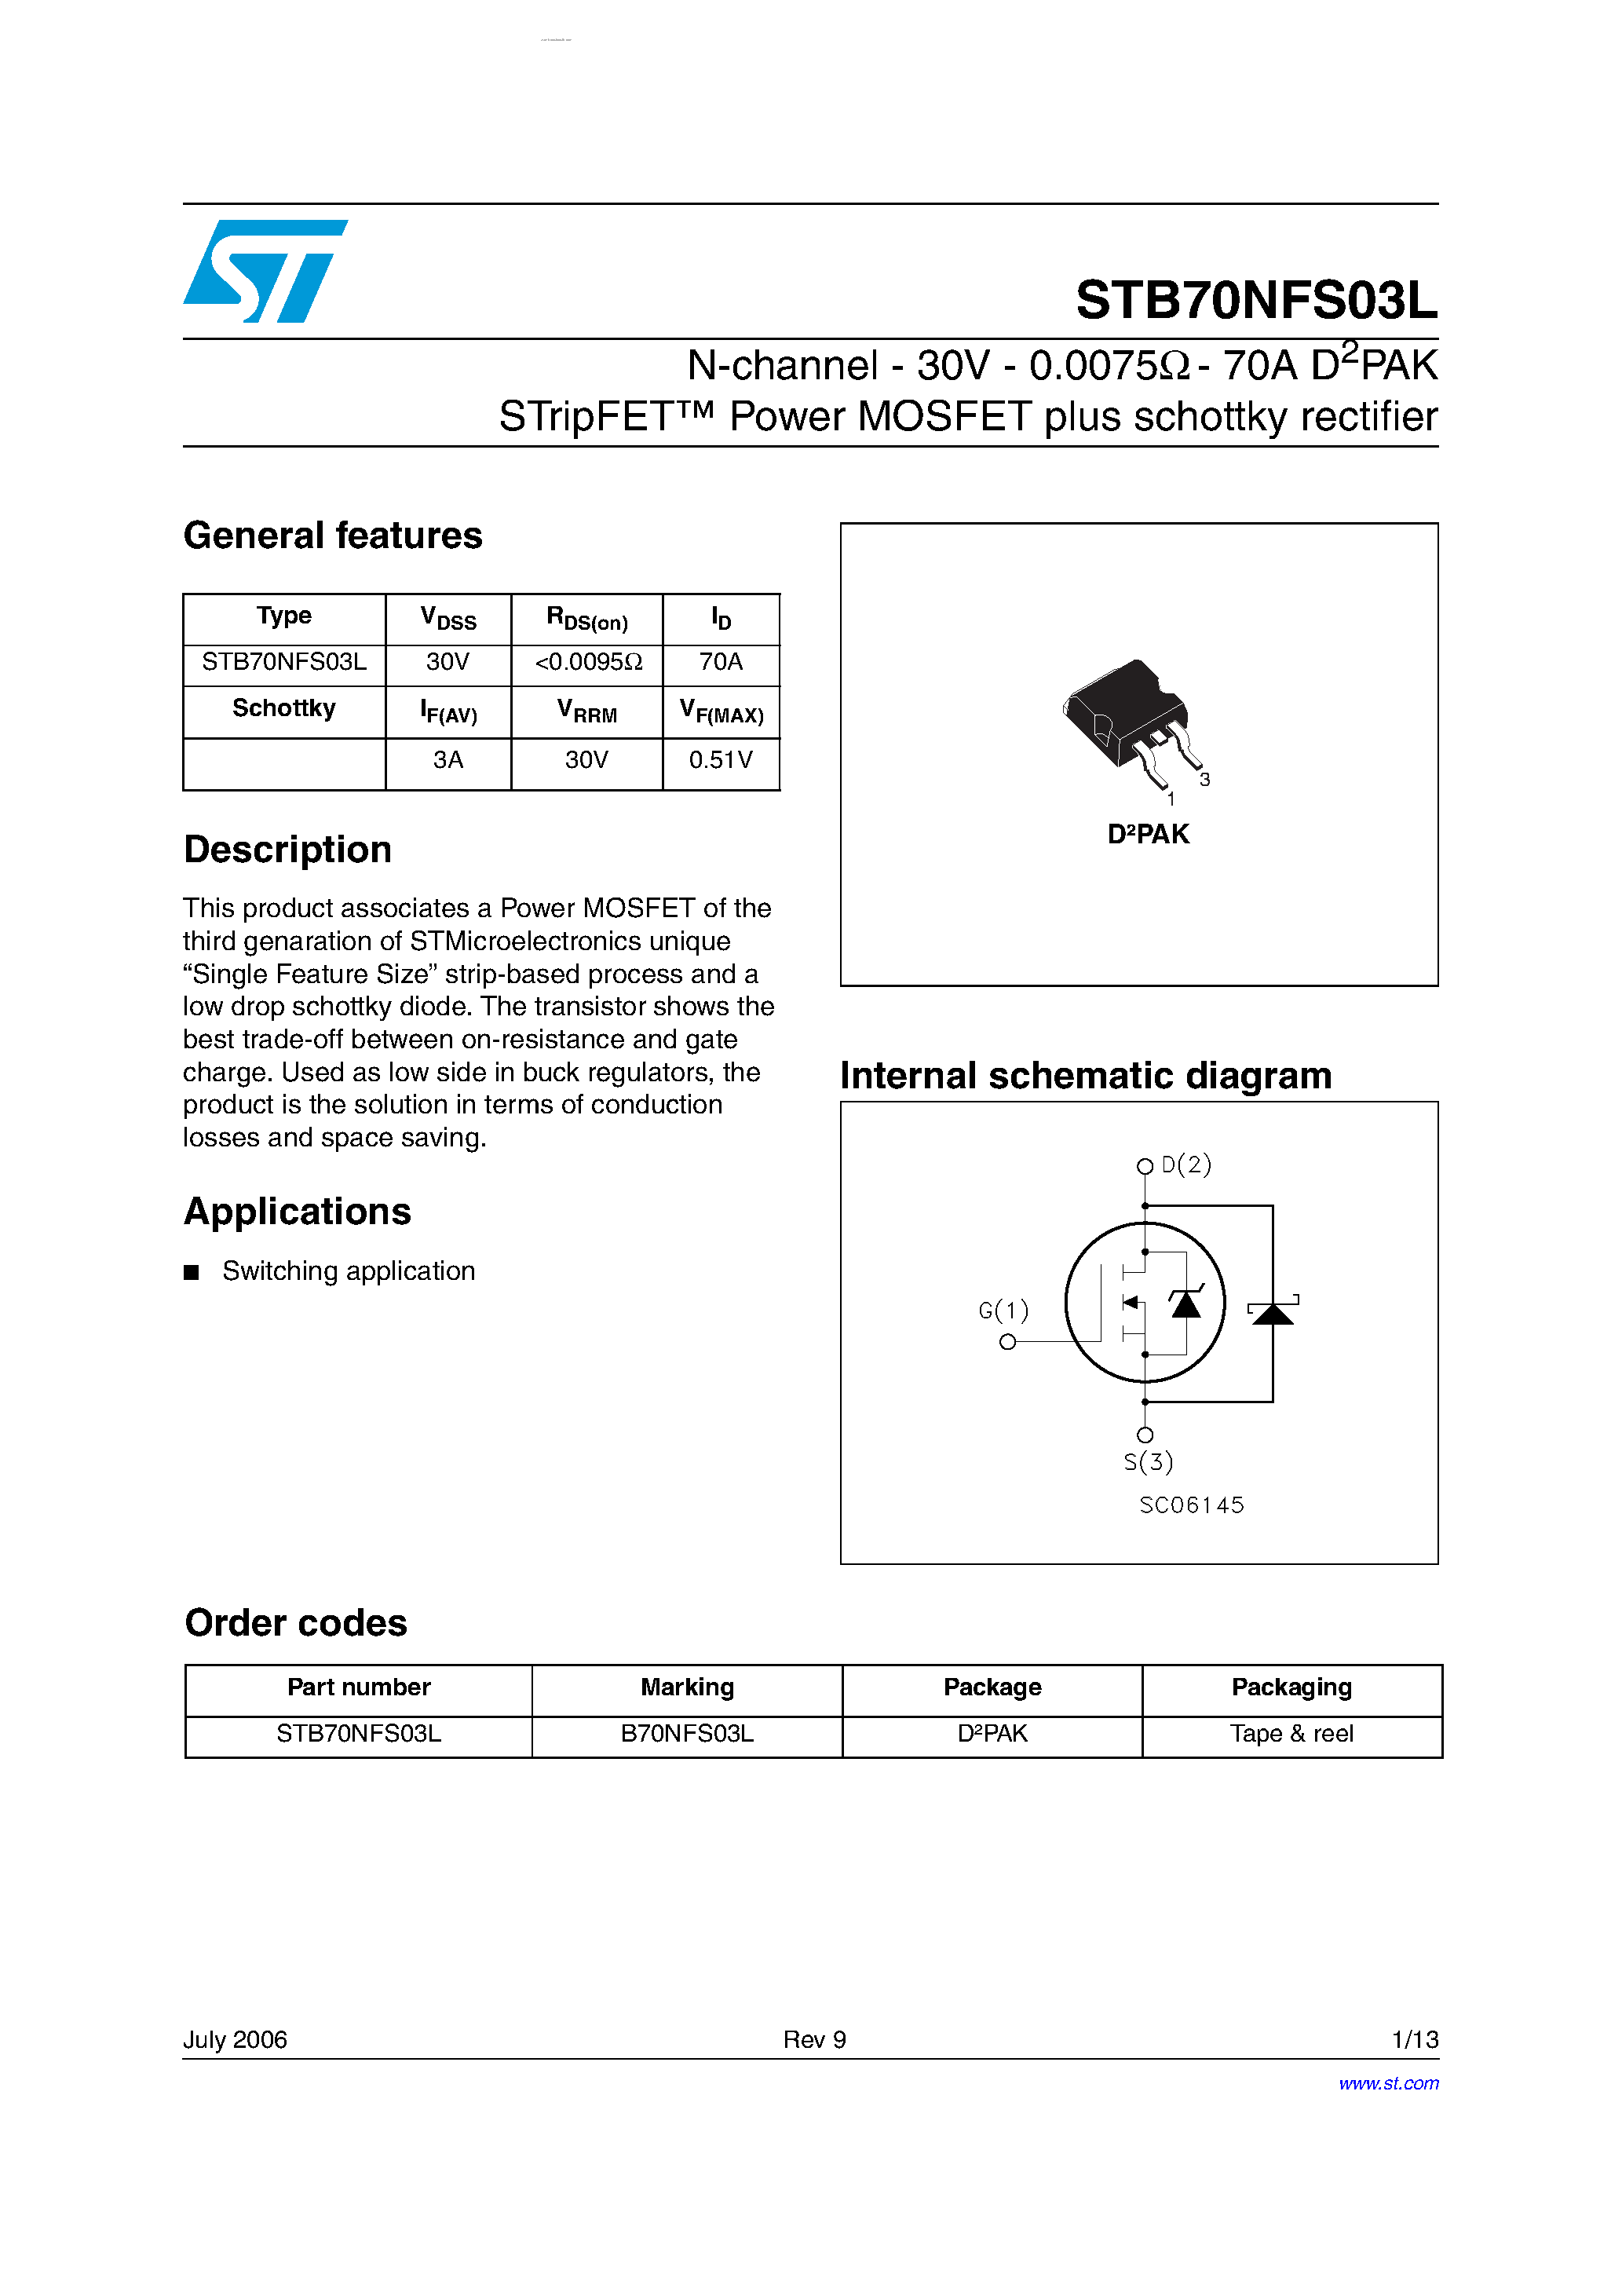 Datasheet STB70NFS03L - N-channel Power MOSFET page 1